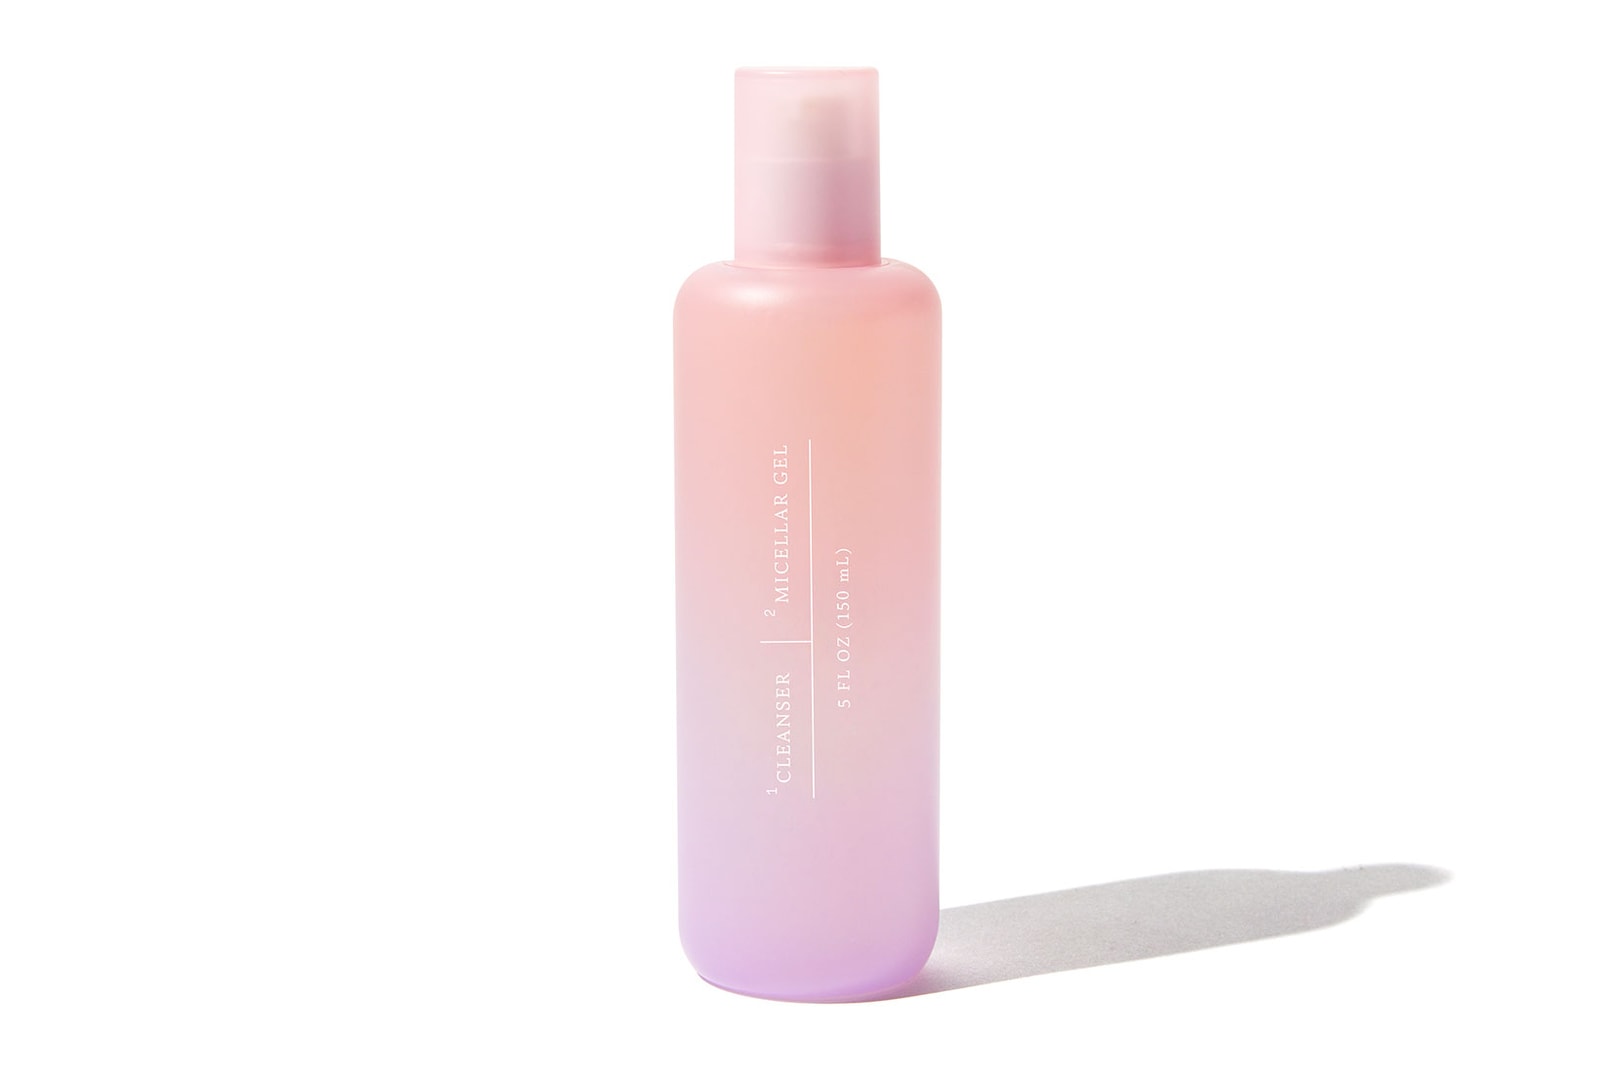 function of beauty skincare launch micellar gel cleanser